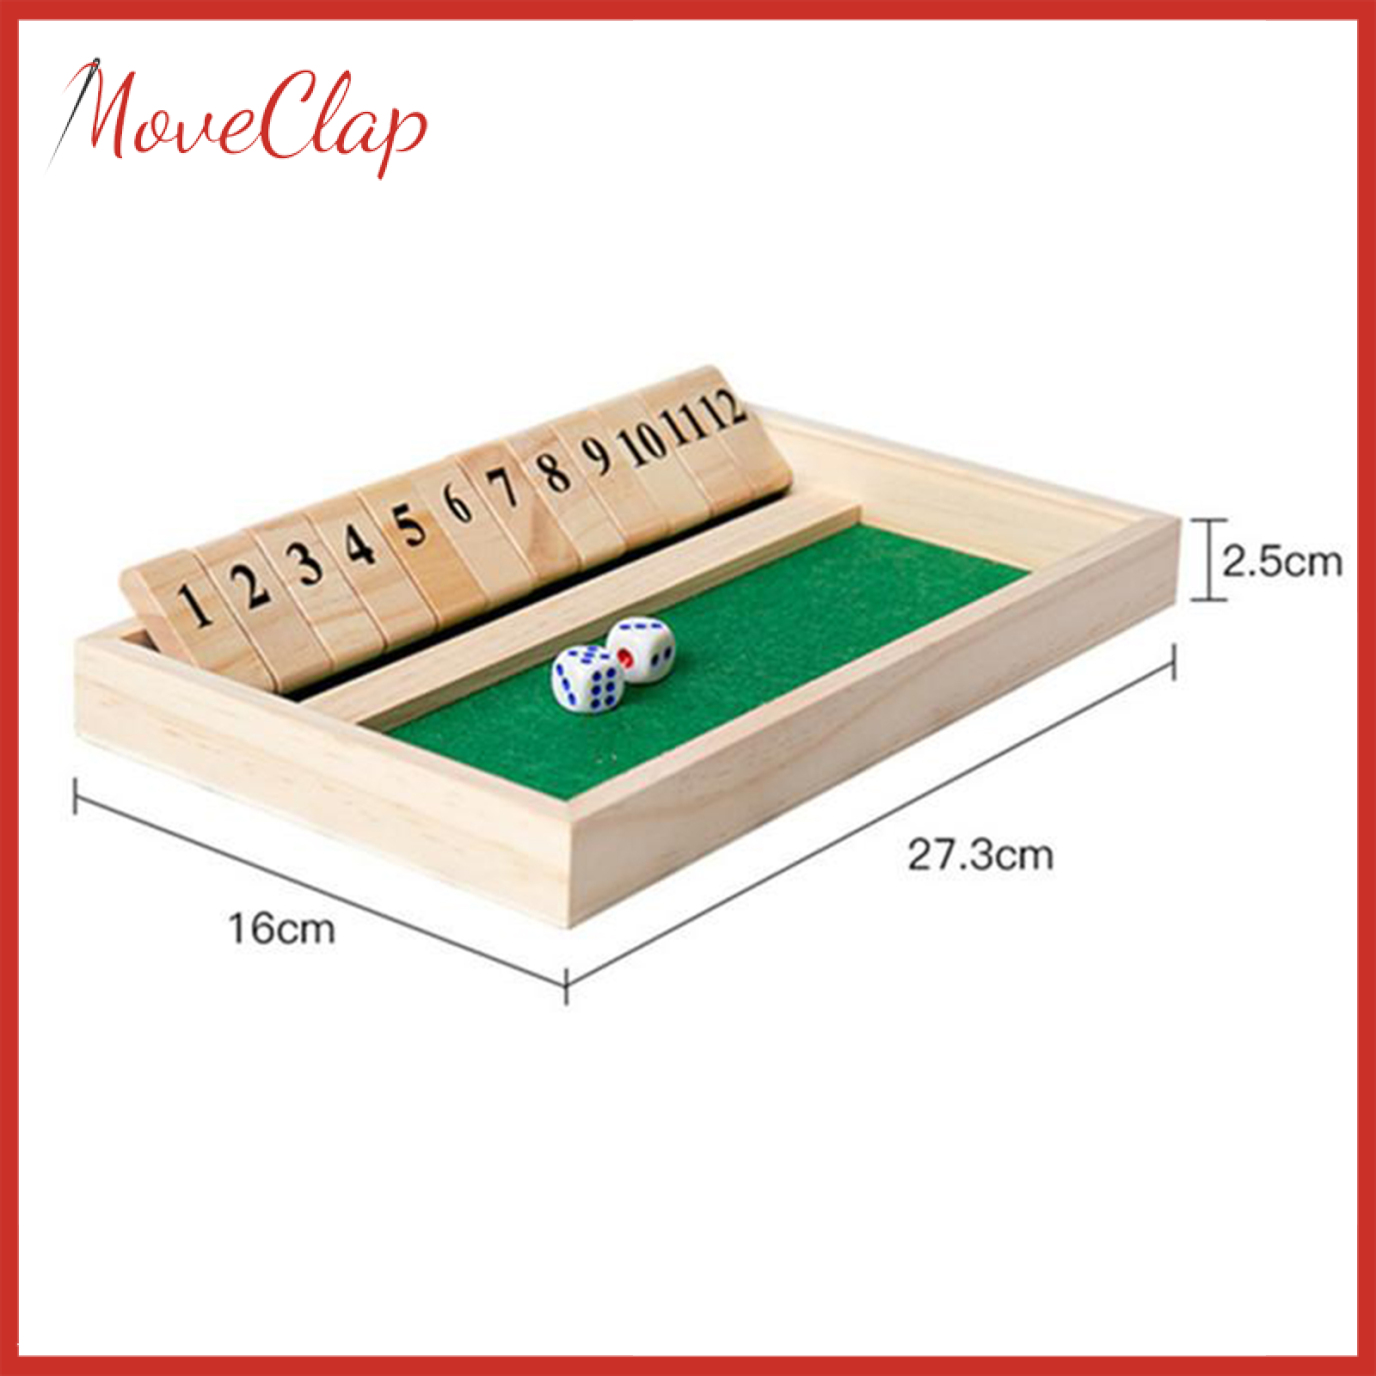 MoveClap Shut The Box Game - 12 Numbers Wooden Dice Game Wooden Number Board Game